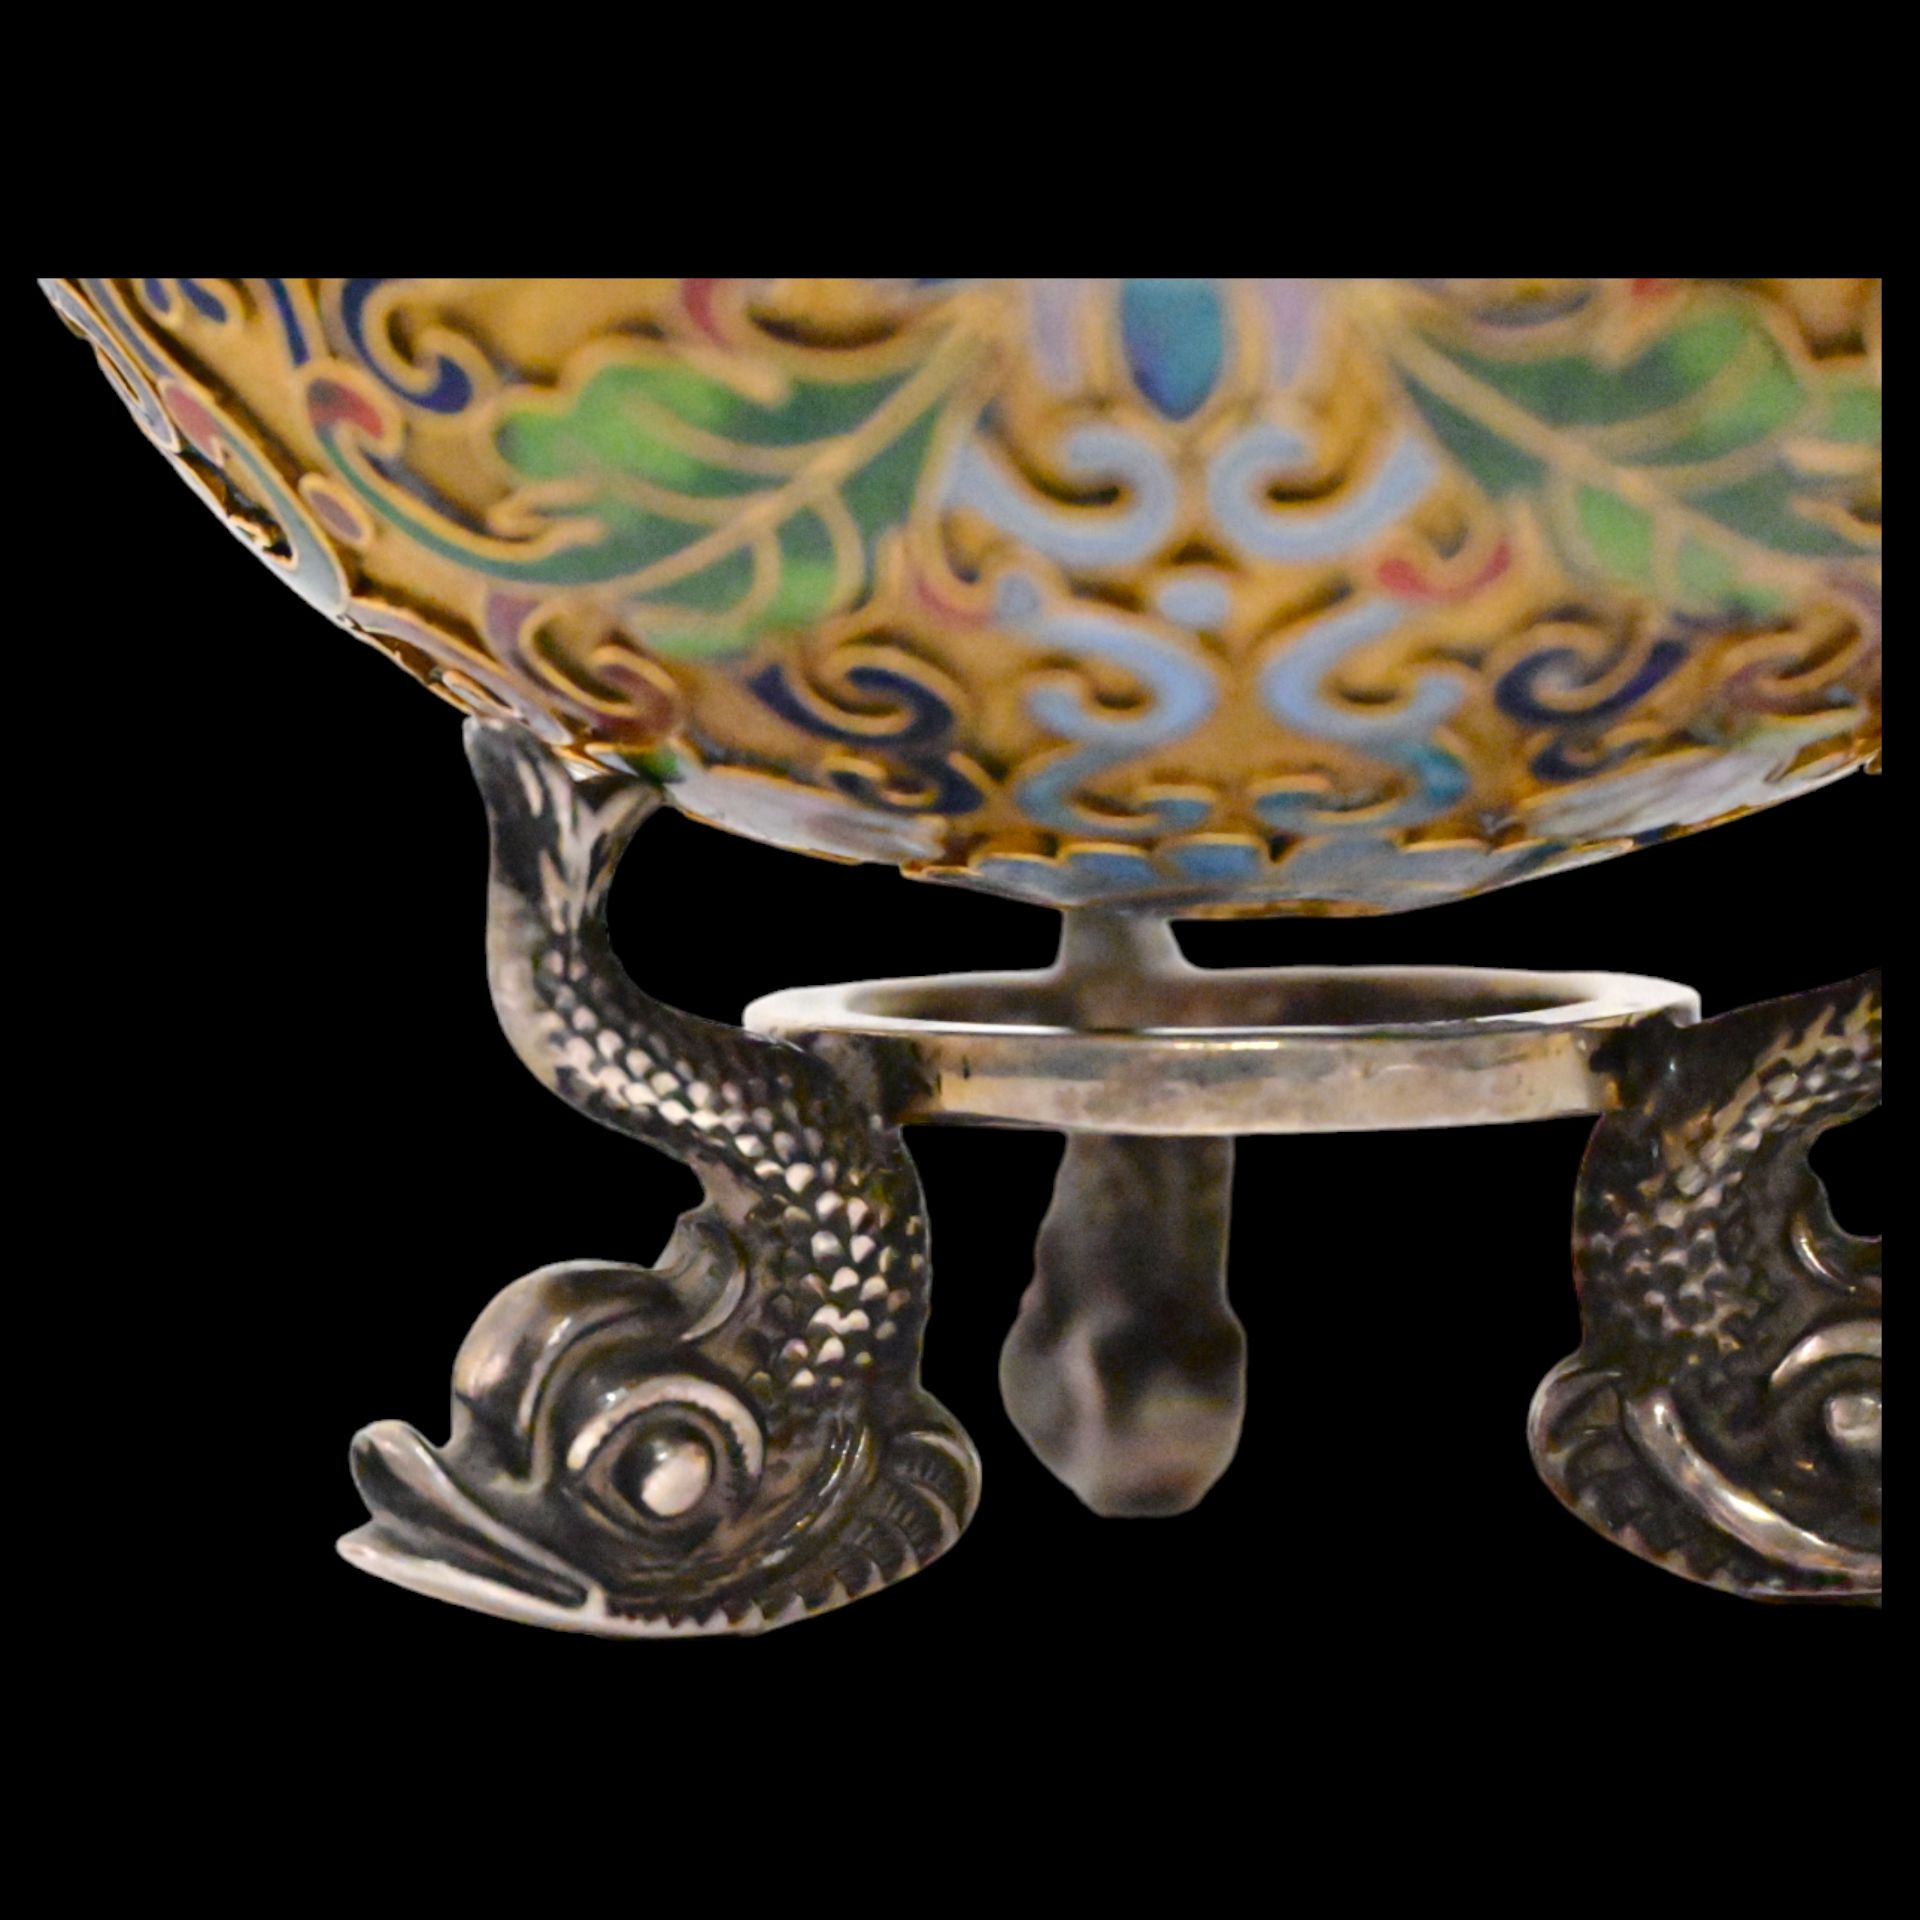 Russian gilded and enamel Easter egg on a silver stand, Russian, 20th century. - Image 3 of 11